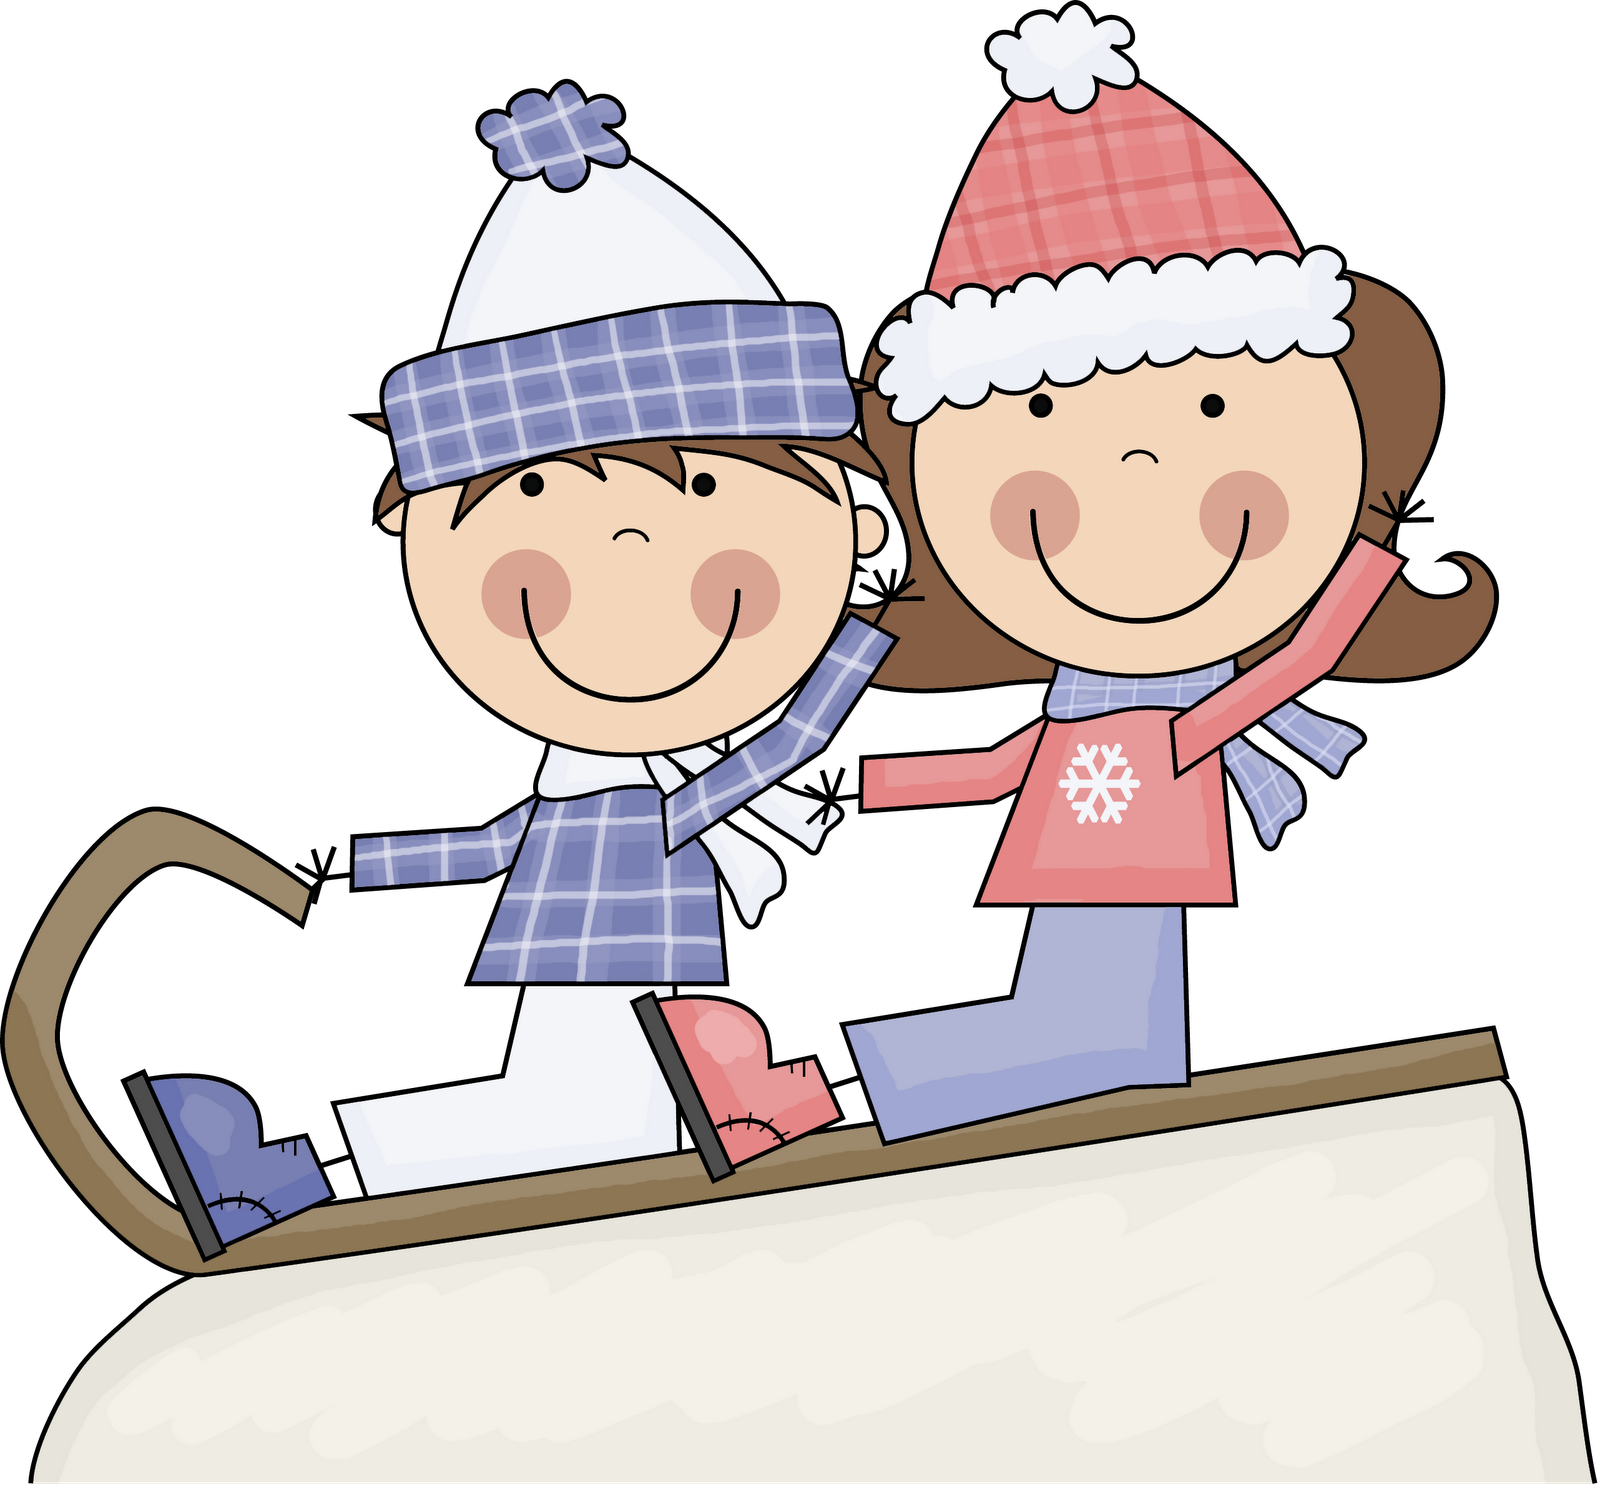 Kids playing in snow clipart clip art